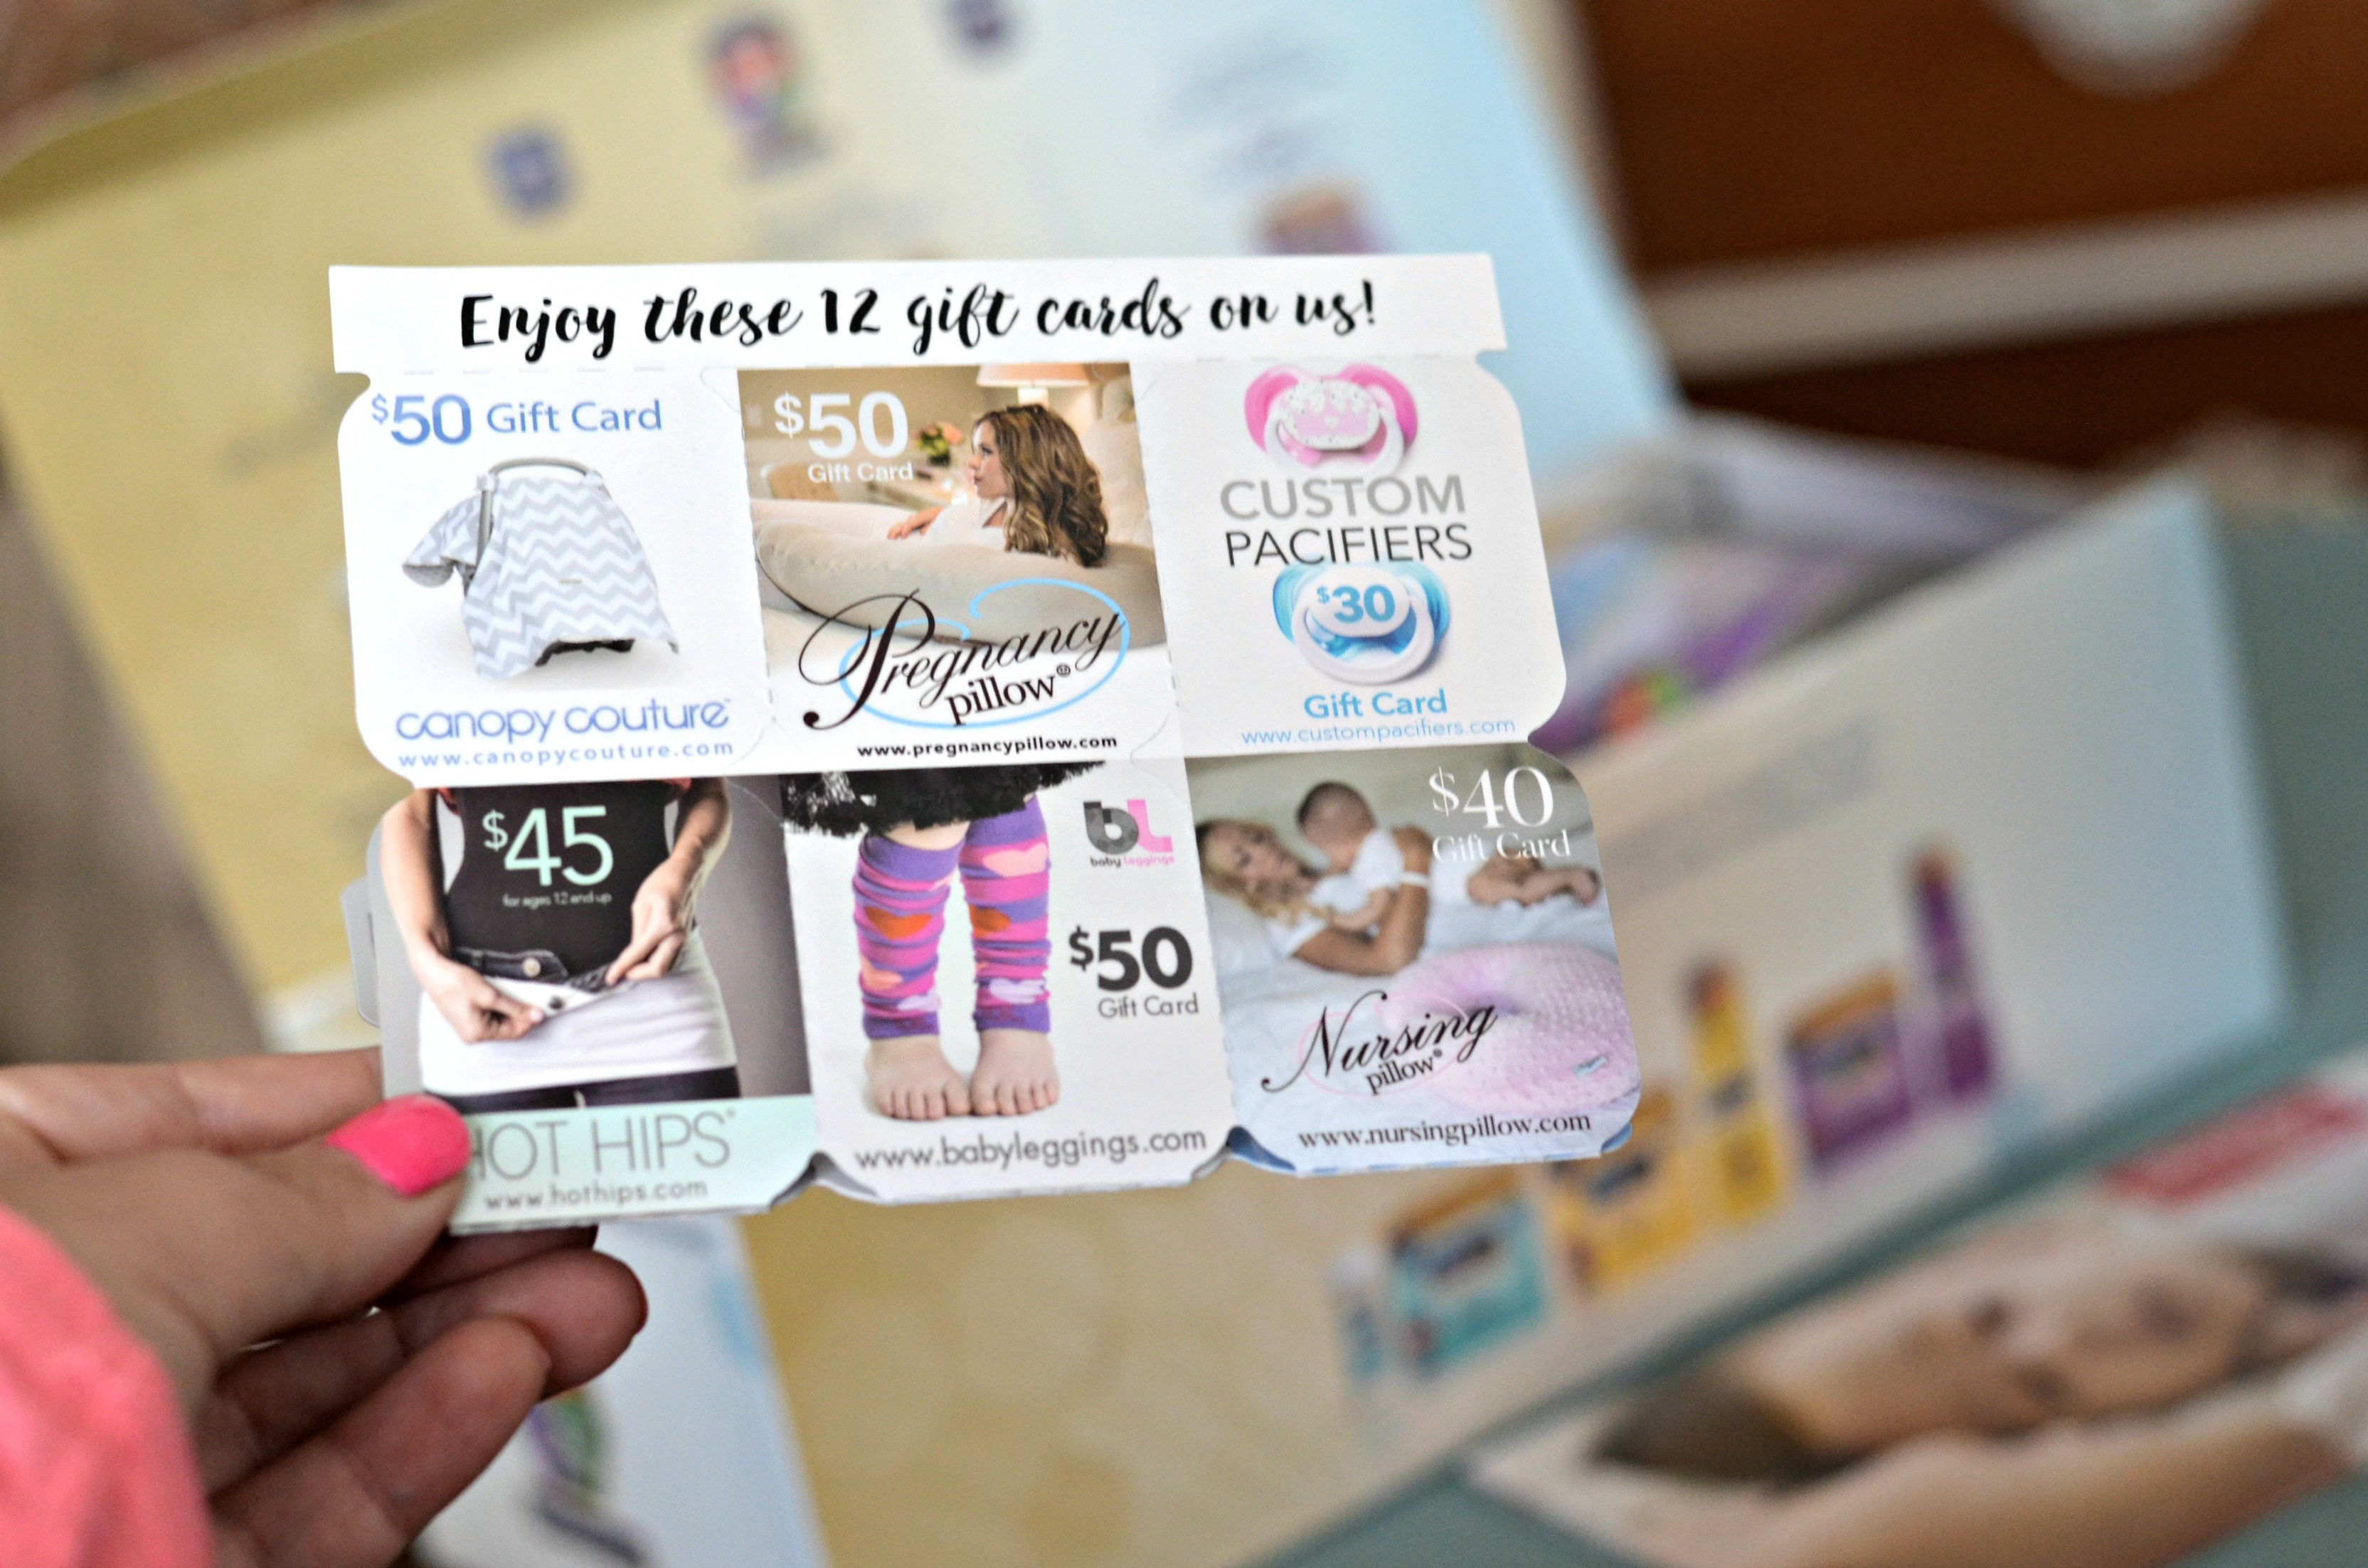 free enfamil baby box - get free enfamil gifts and offers like these Enfamil gift cards